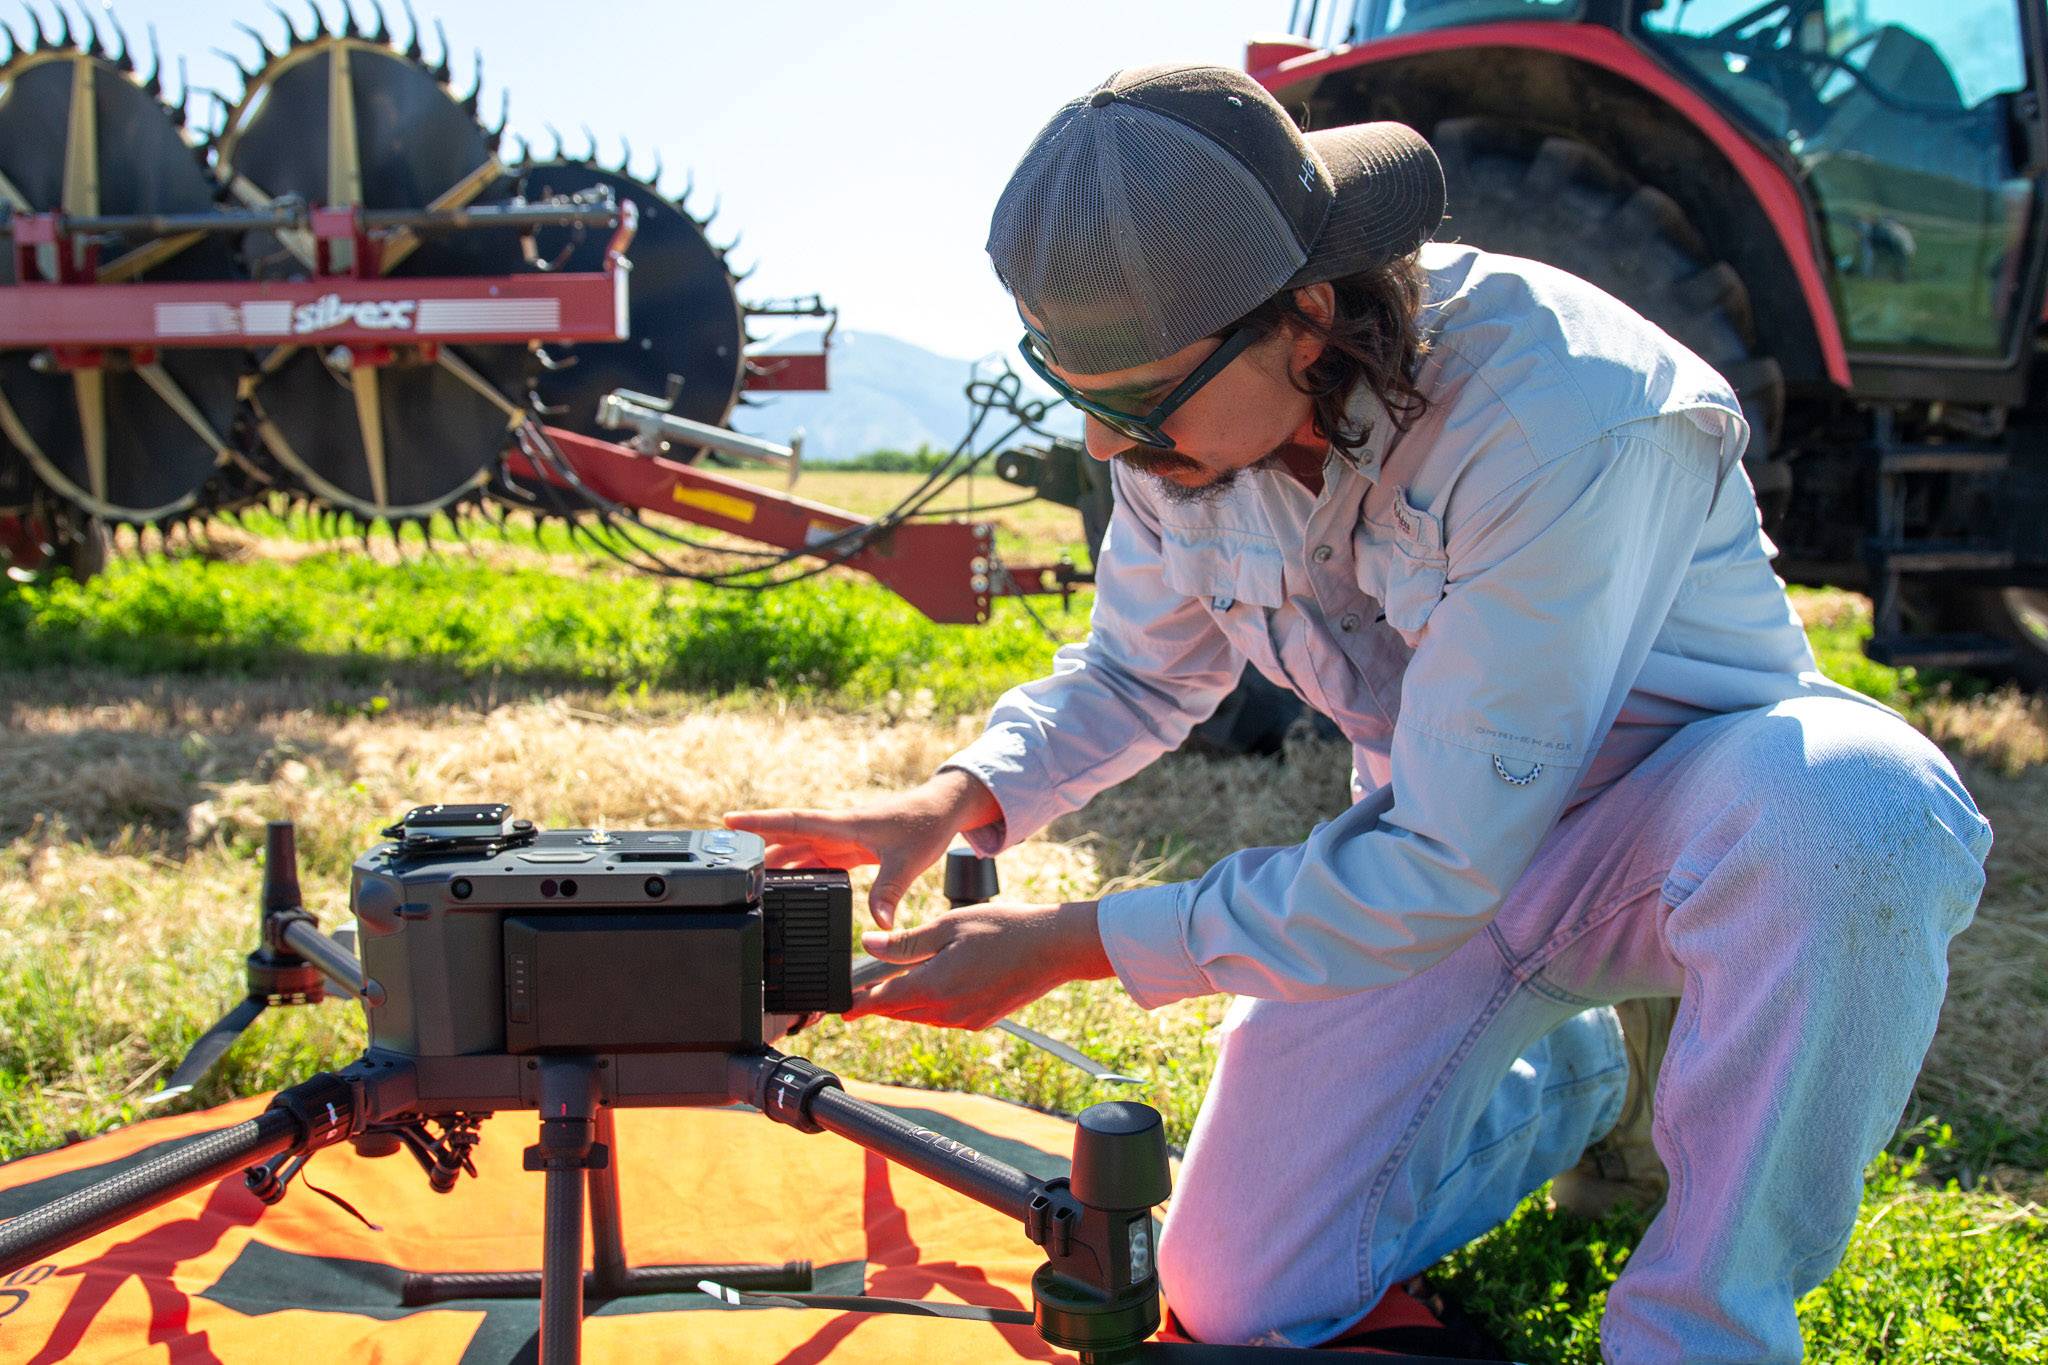 technician setting up a drone for flight over an agricultural field